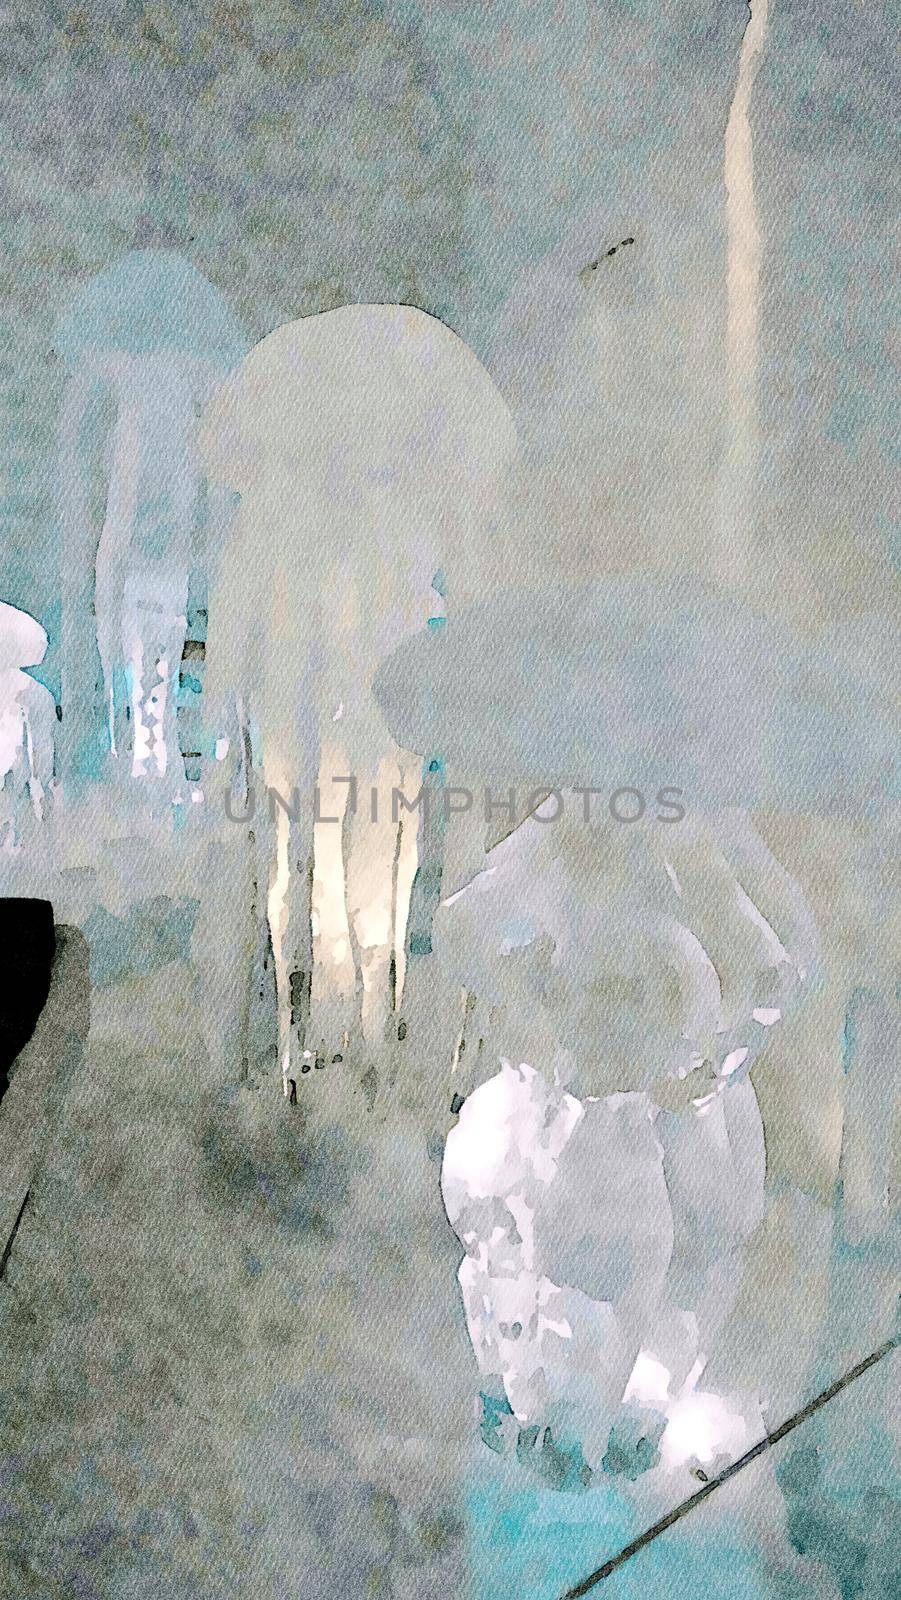 Jukkasjarvi, Sweden, February 27, 2020. one of the sculptures of the ice hotel. Digital watercolors painting.